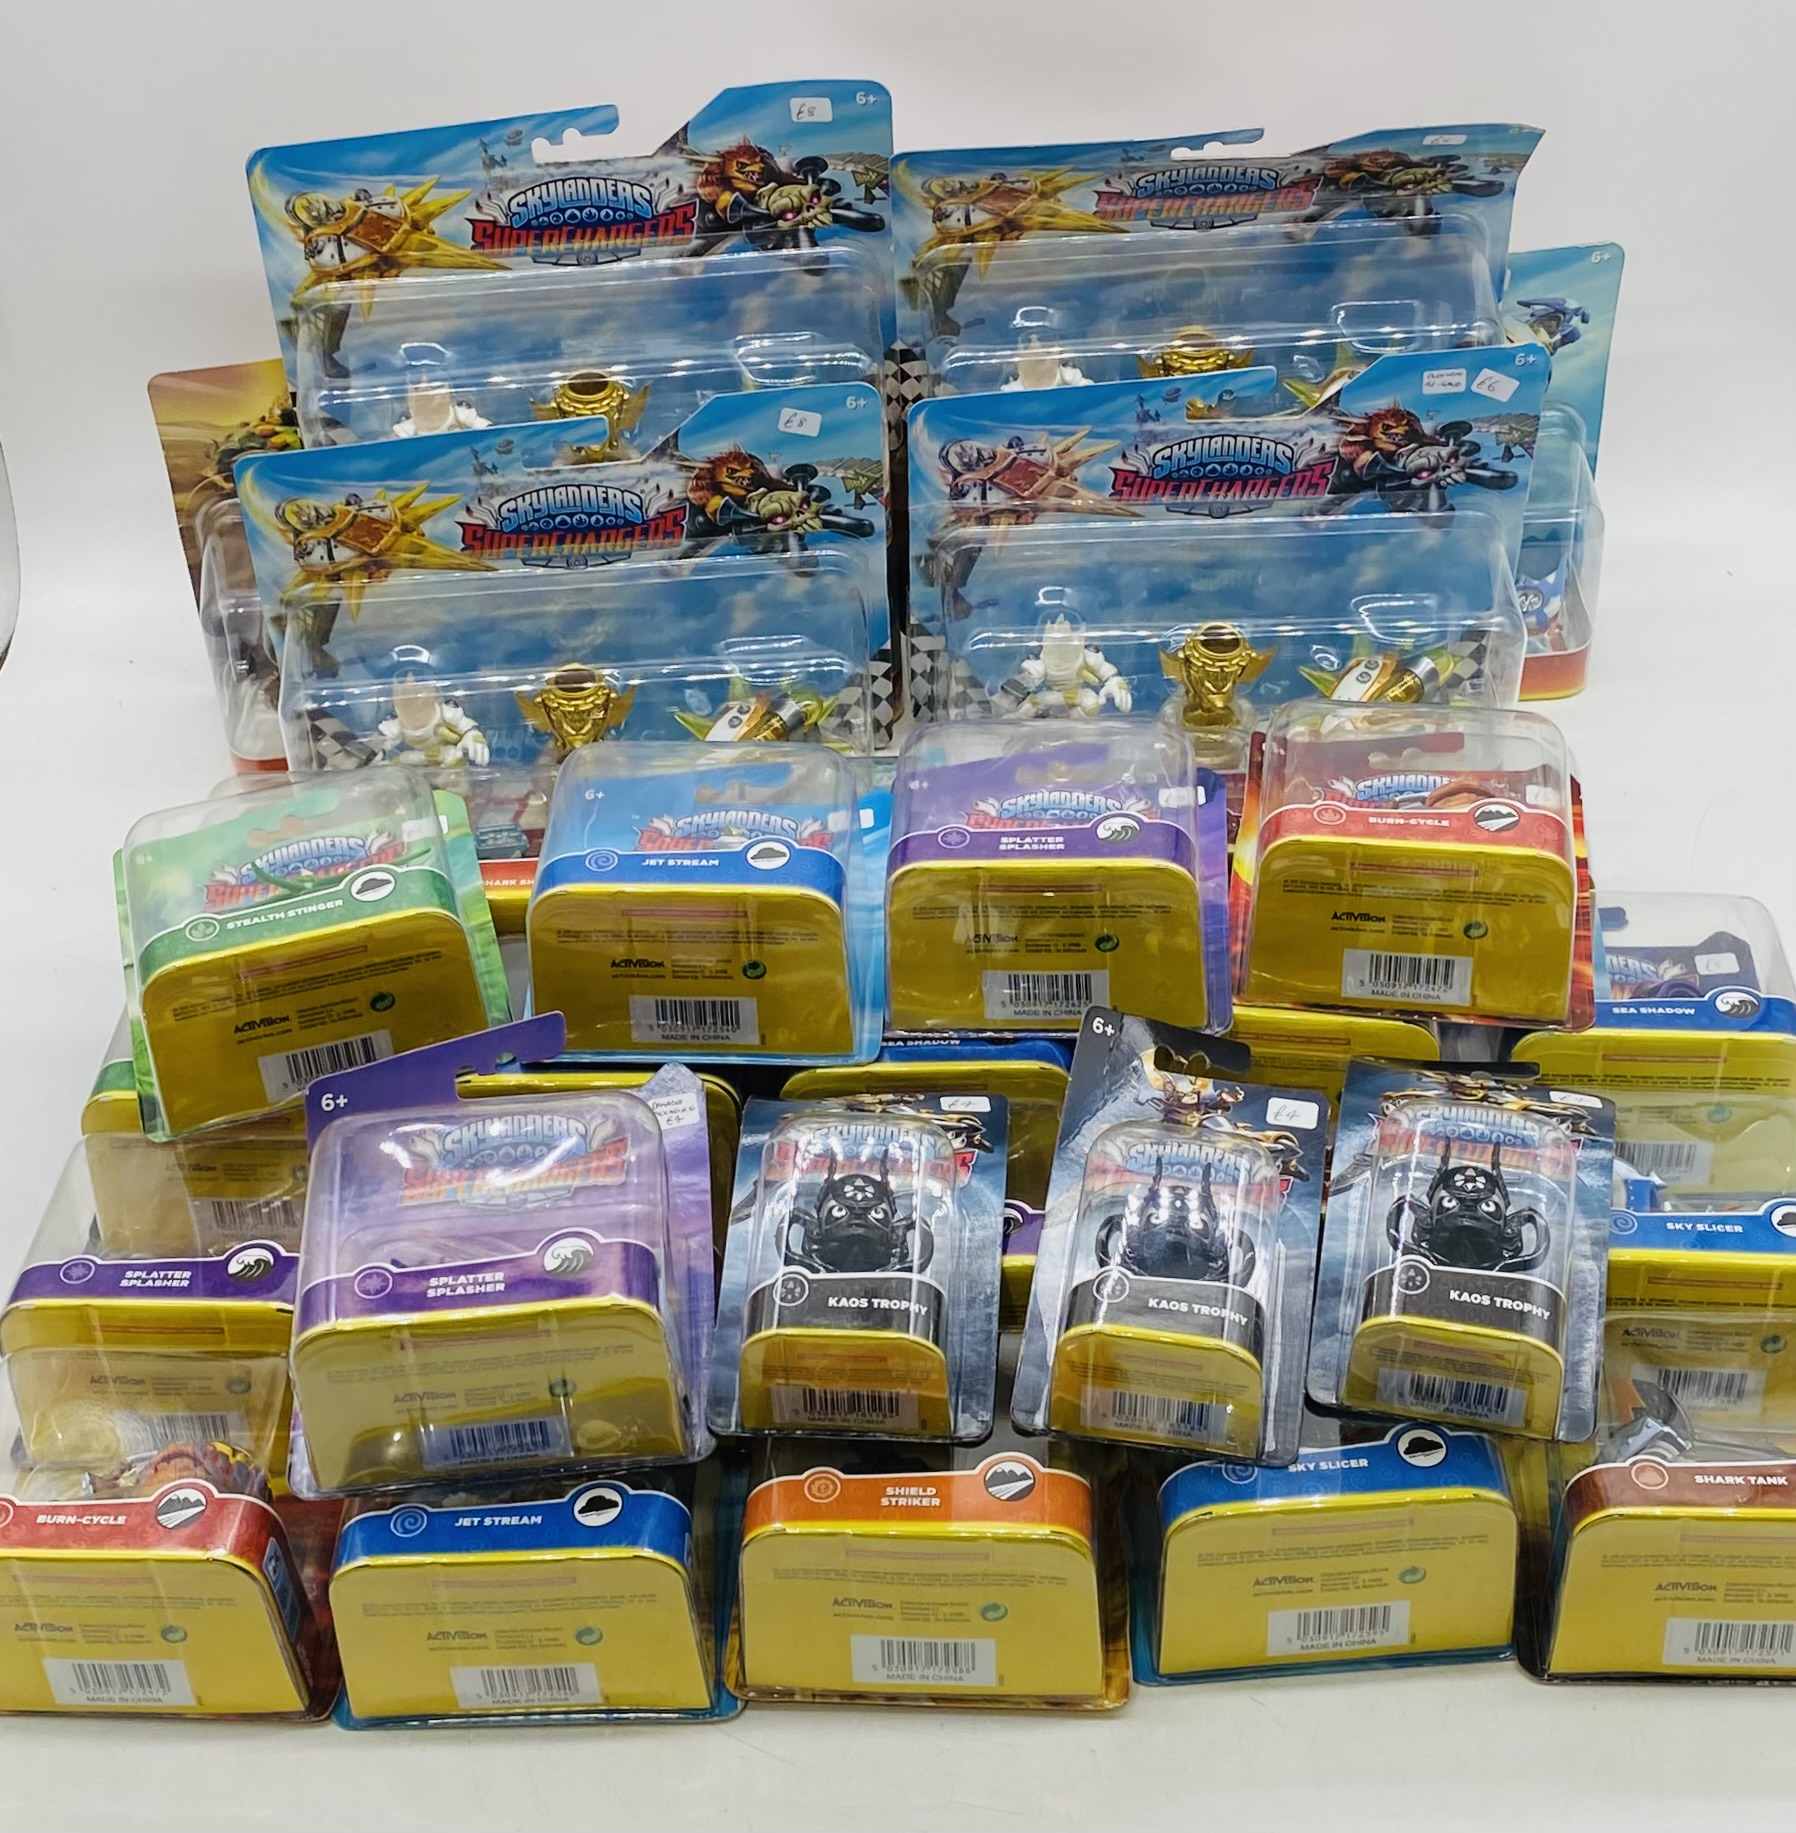 A collection of Skylanders SuperChargers vehicles by Activision including triple action packs, Sky